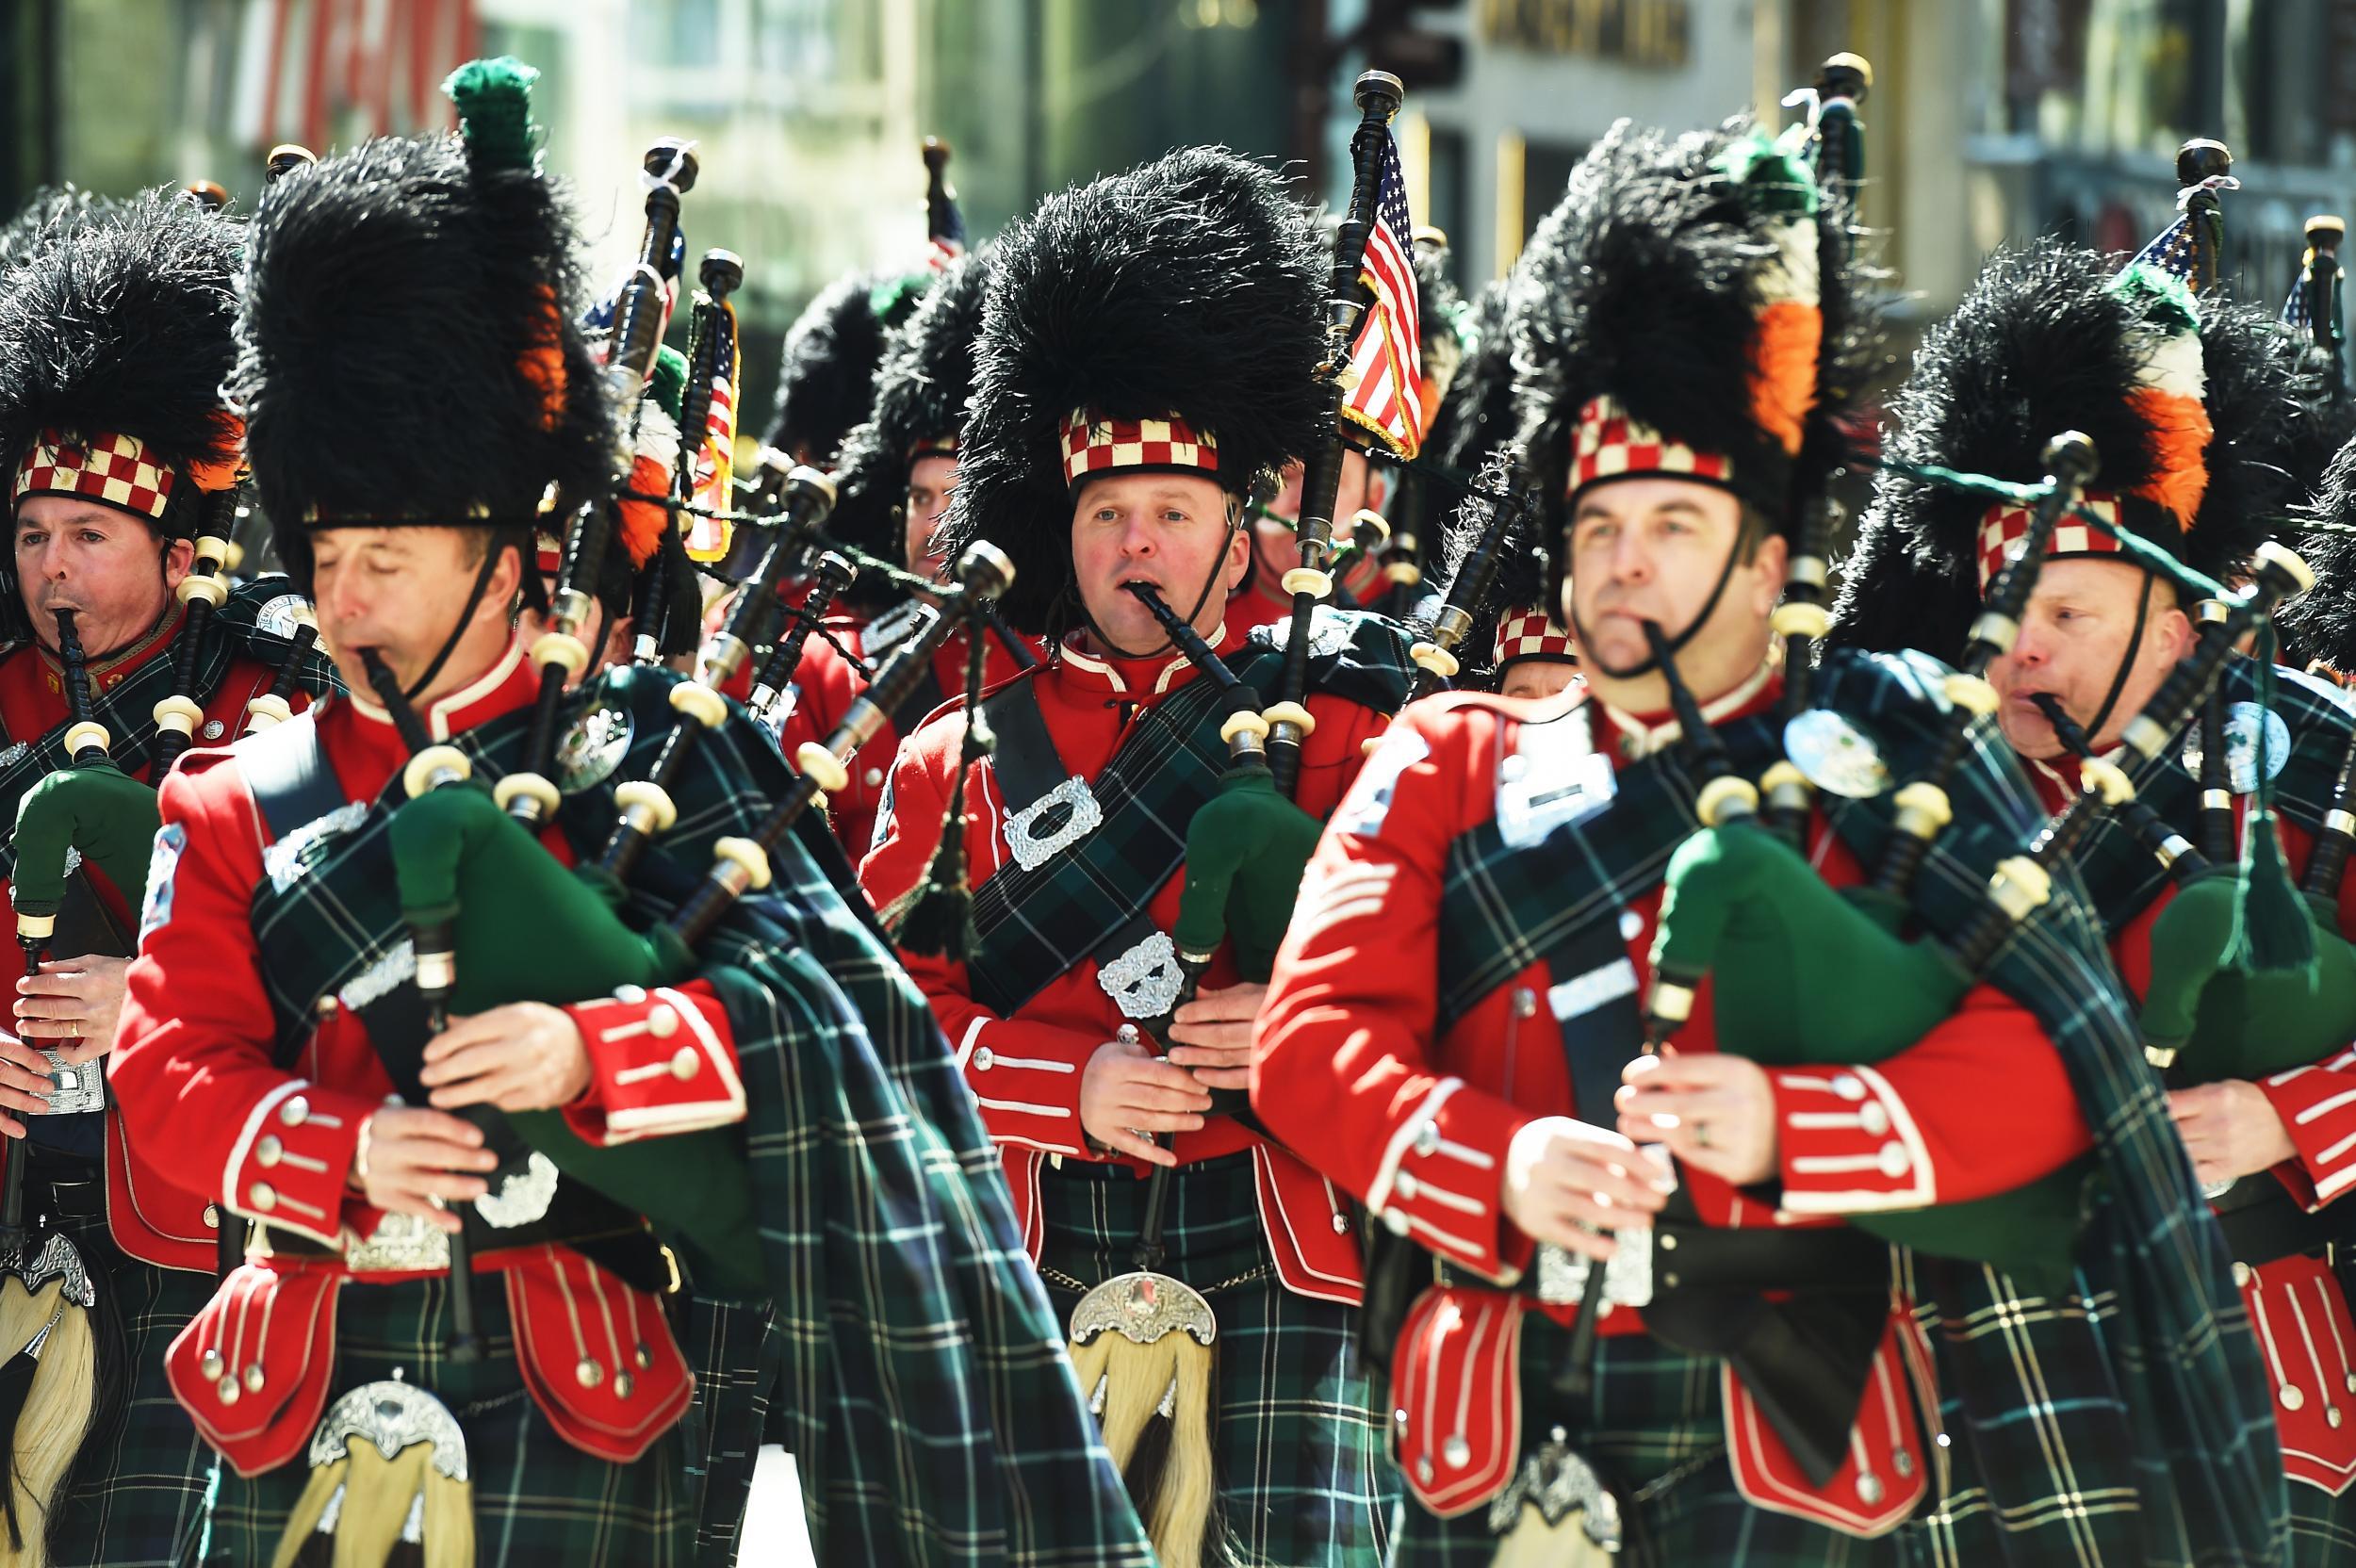 The 10 biggest St. Patrick's Day parades around the world